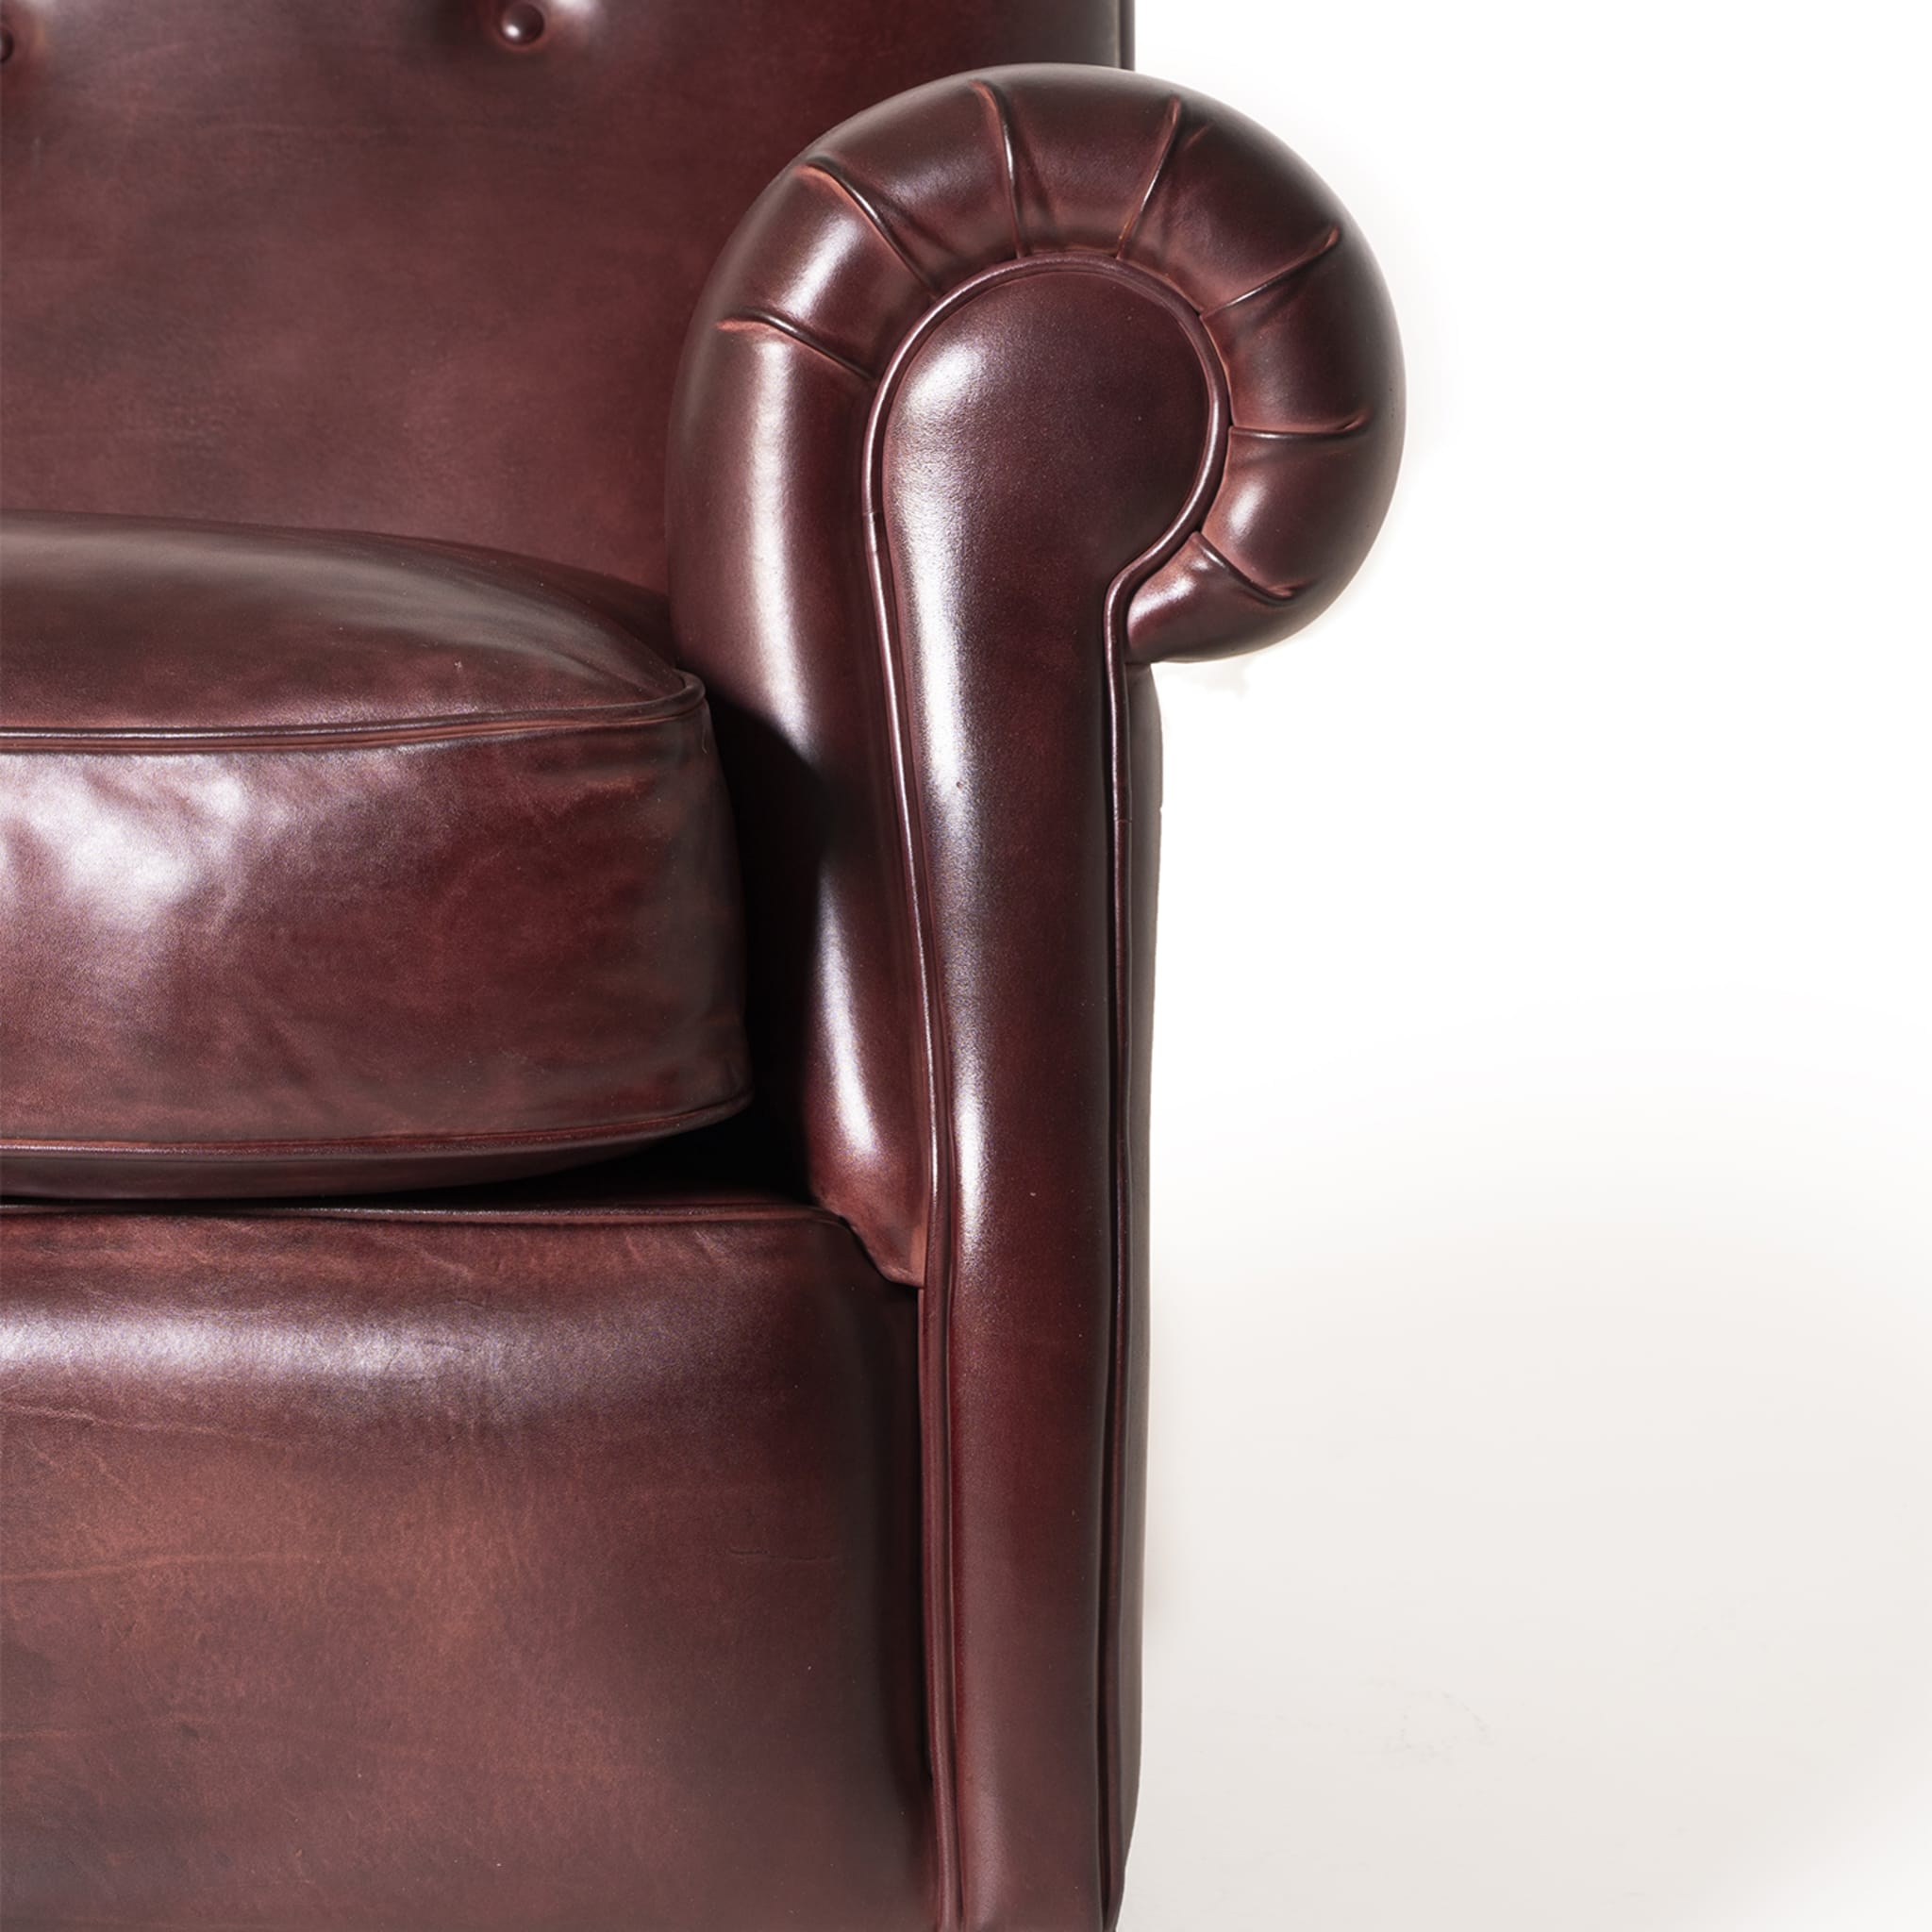 Roma Armchair Tribeca Collection by Marco and Giulio Mantellassi - Alternative view 3